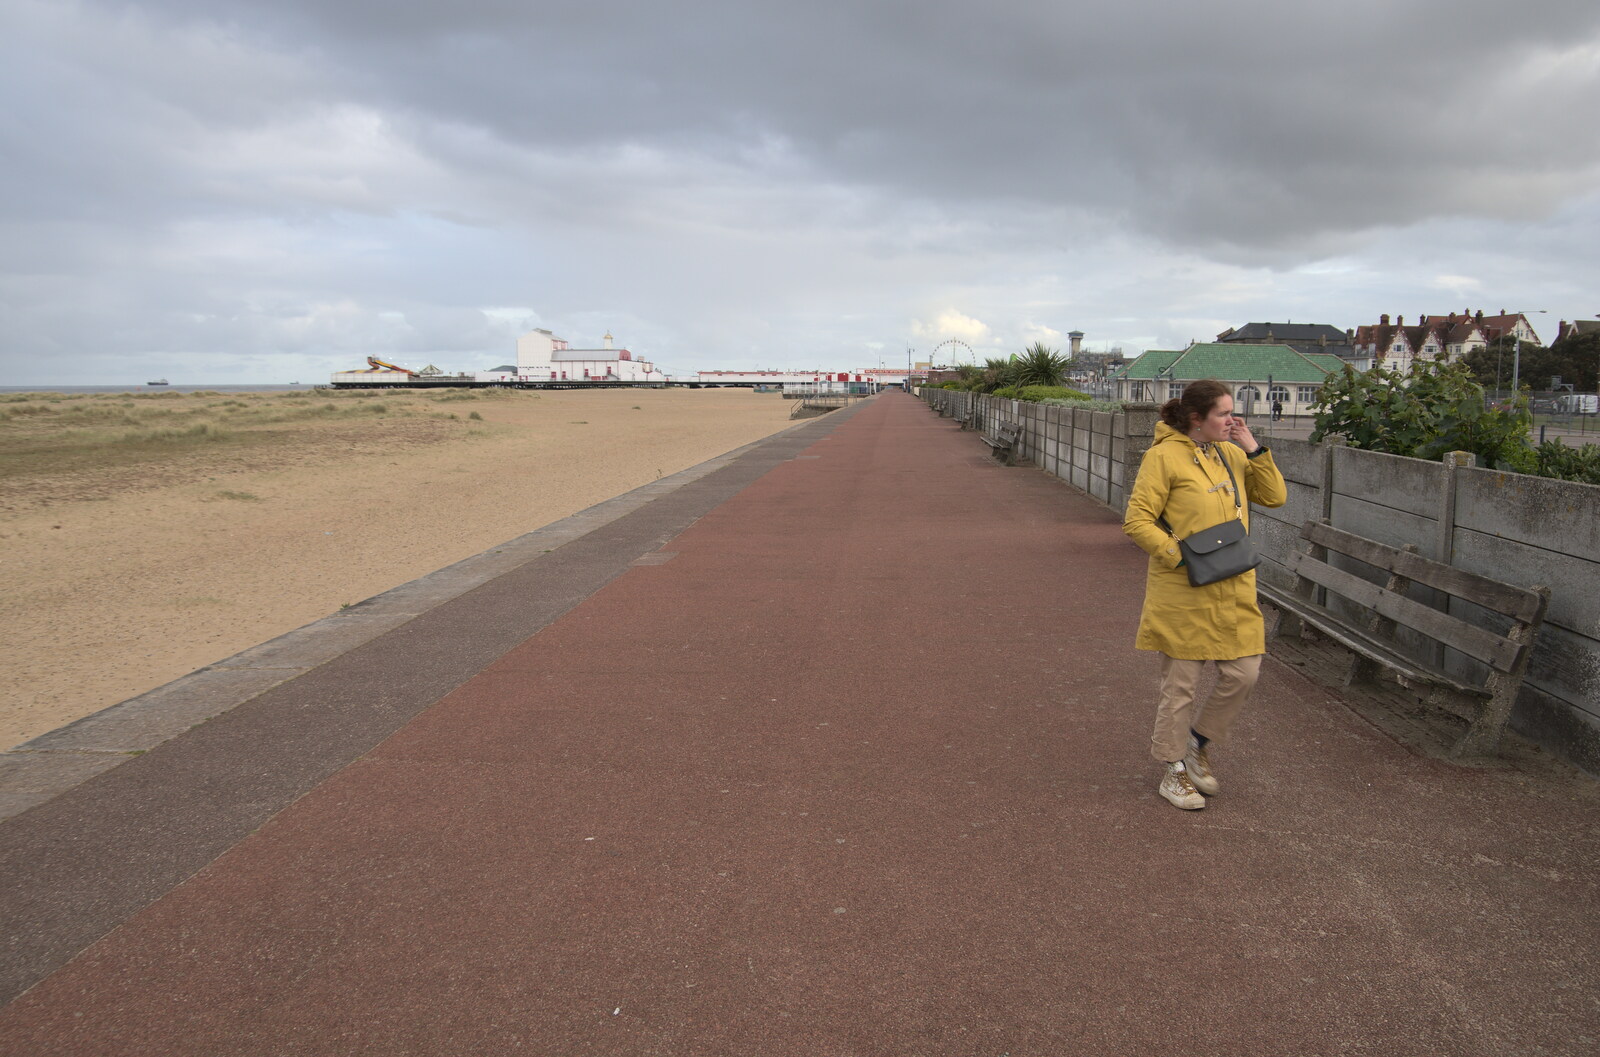 Isobel on the promenade from Faded Seaside Glamour: A Weekend in Great Yarmouth, Norfolk - 29th May 2022